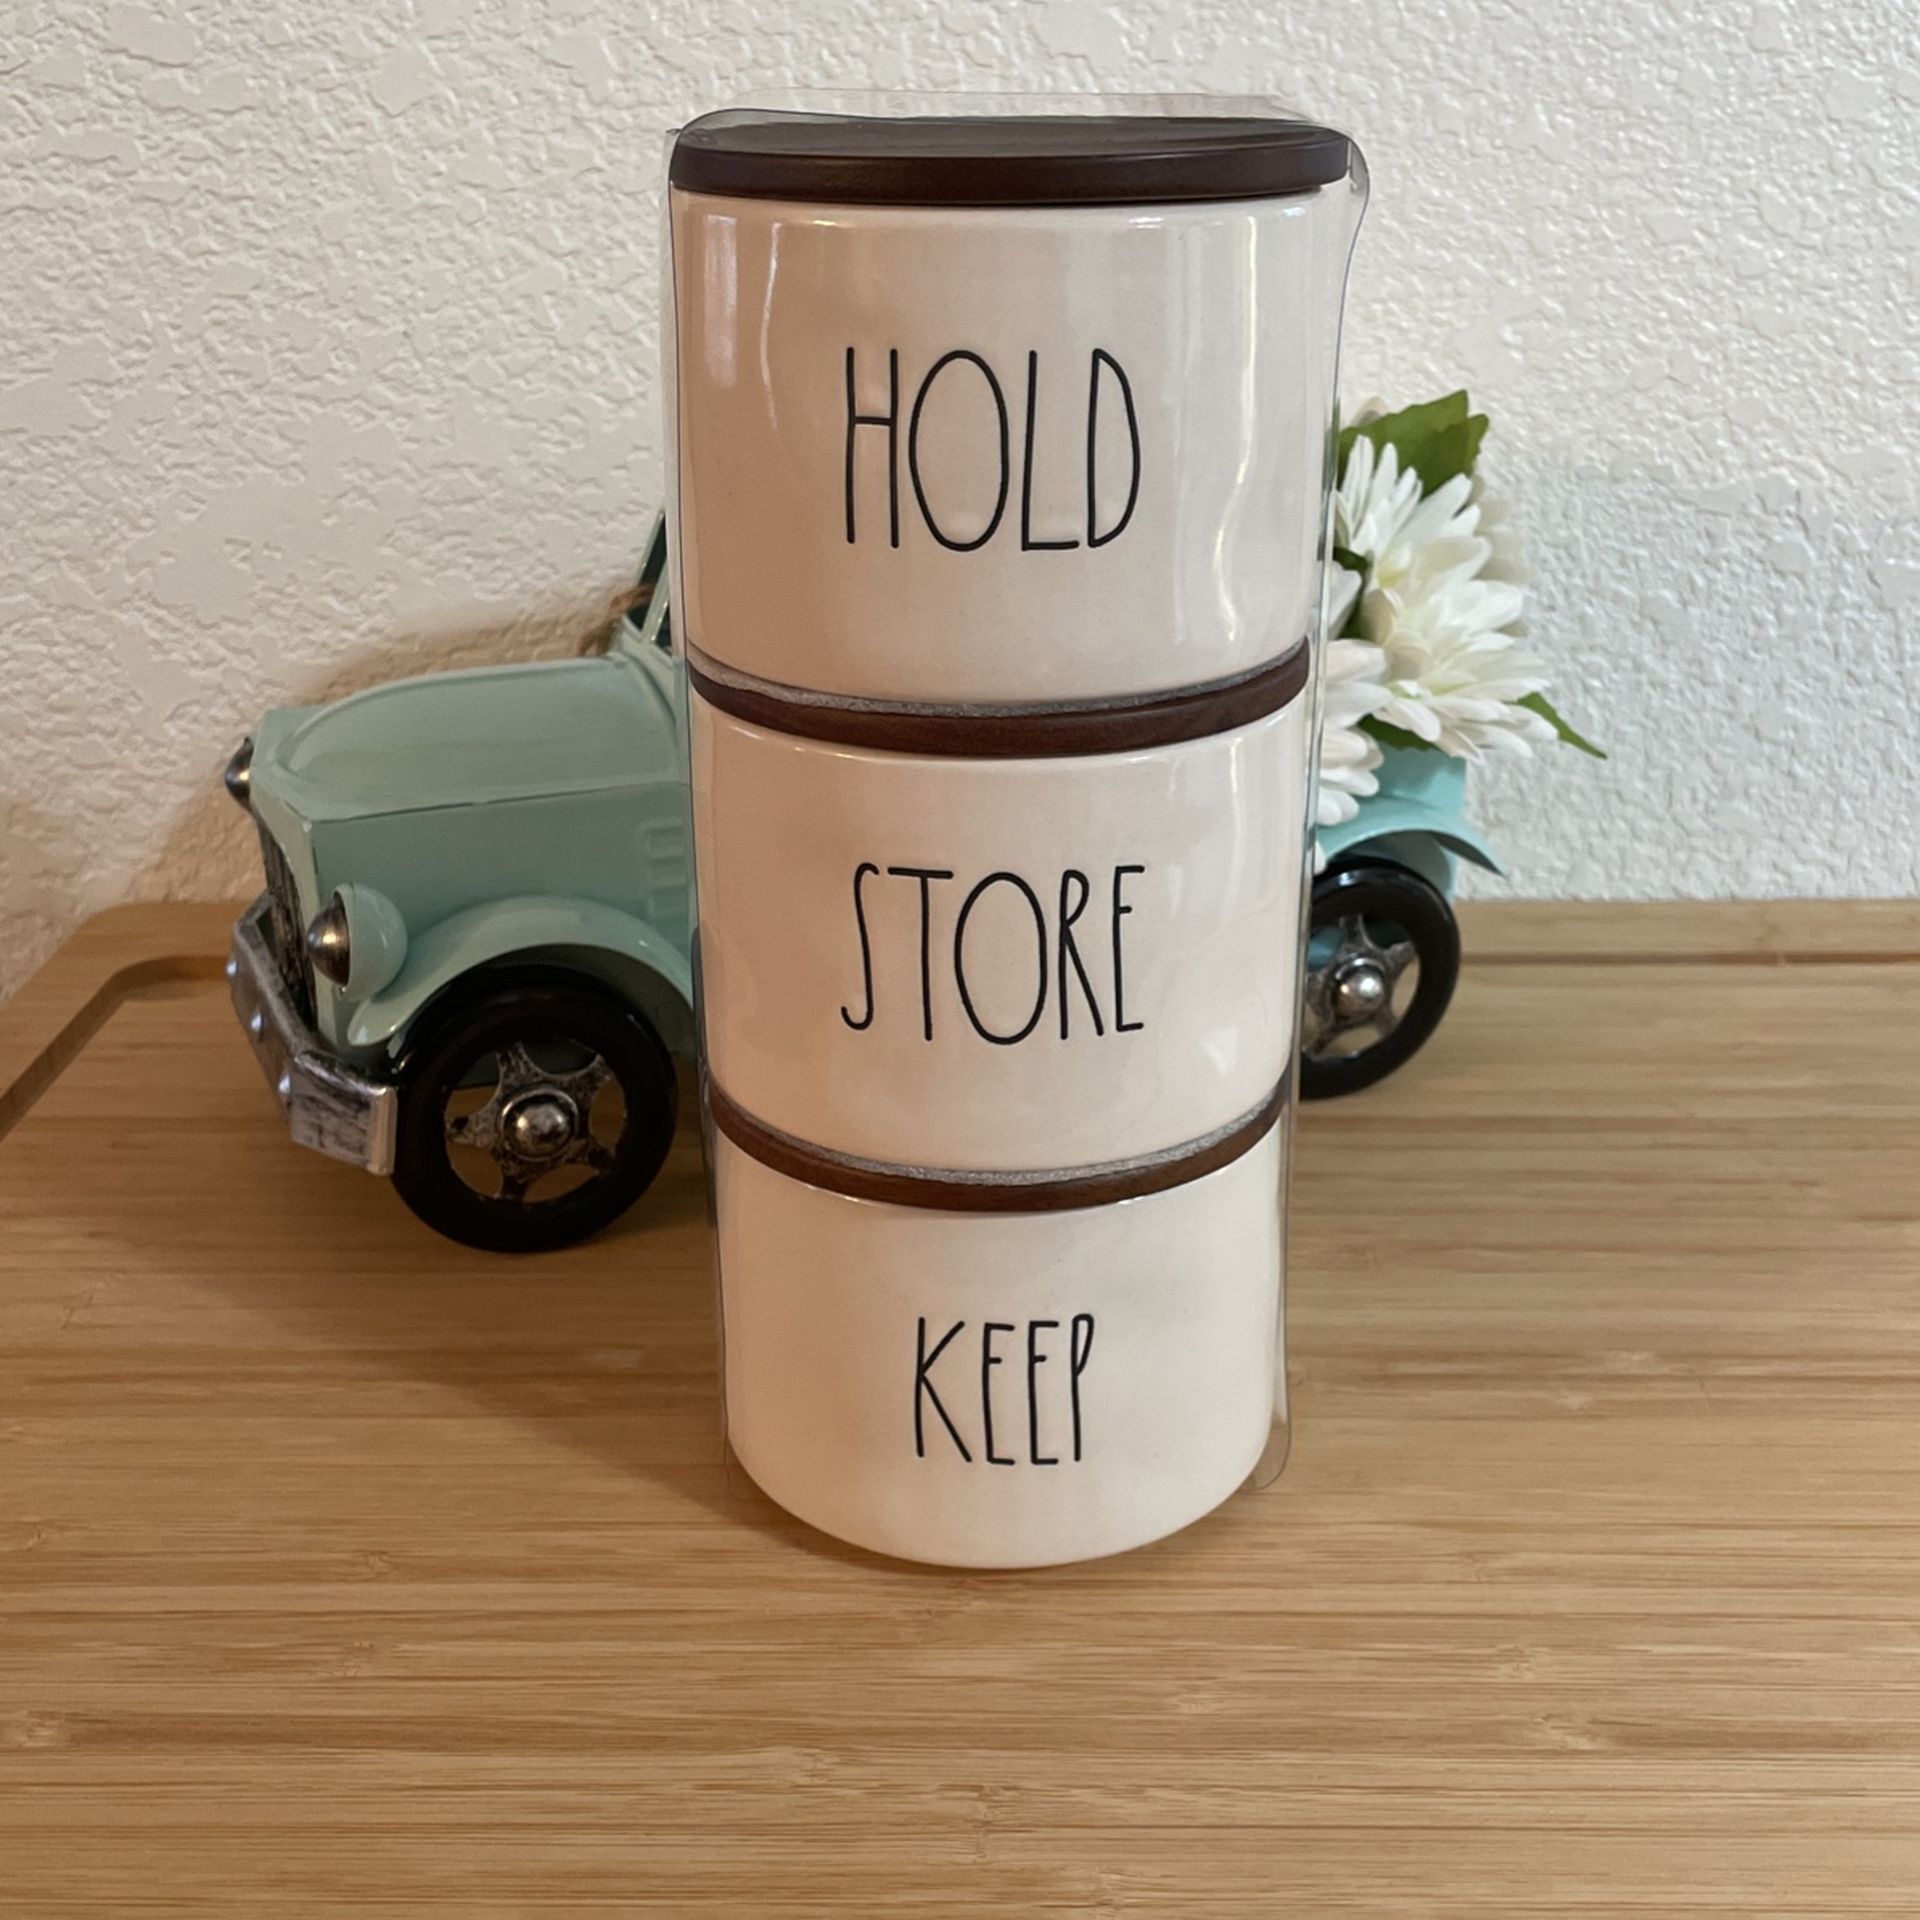 Rae Dunn “HOLD, STORE, KEEP” canister set